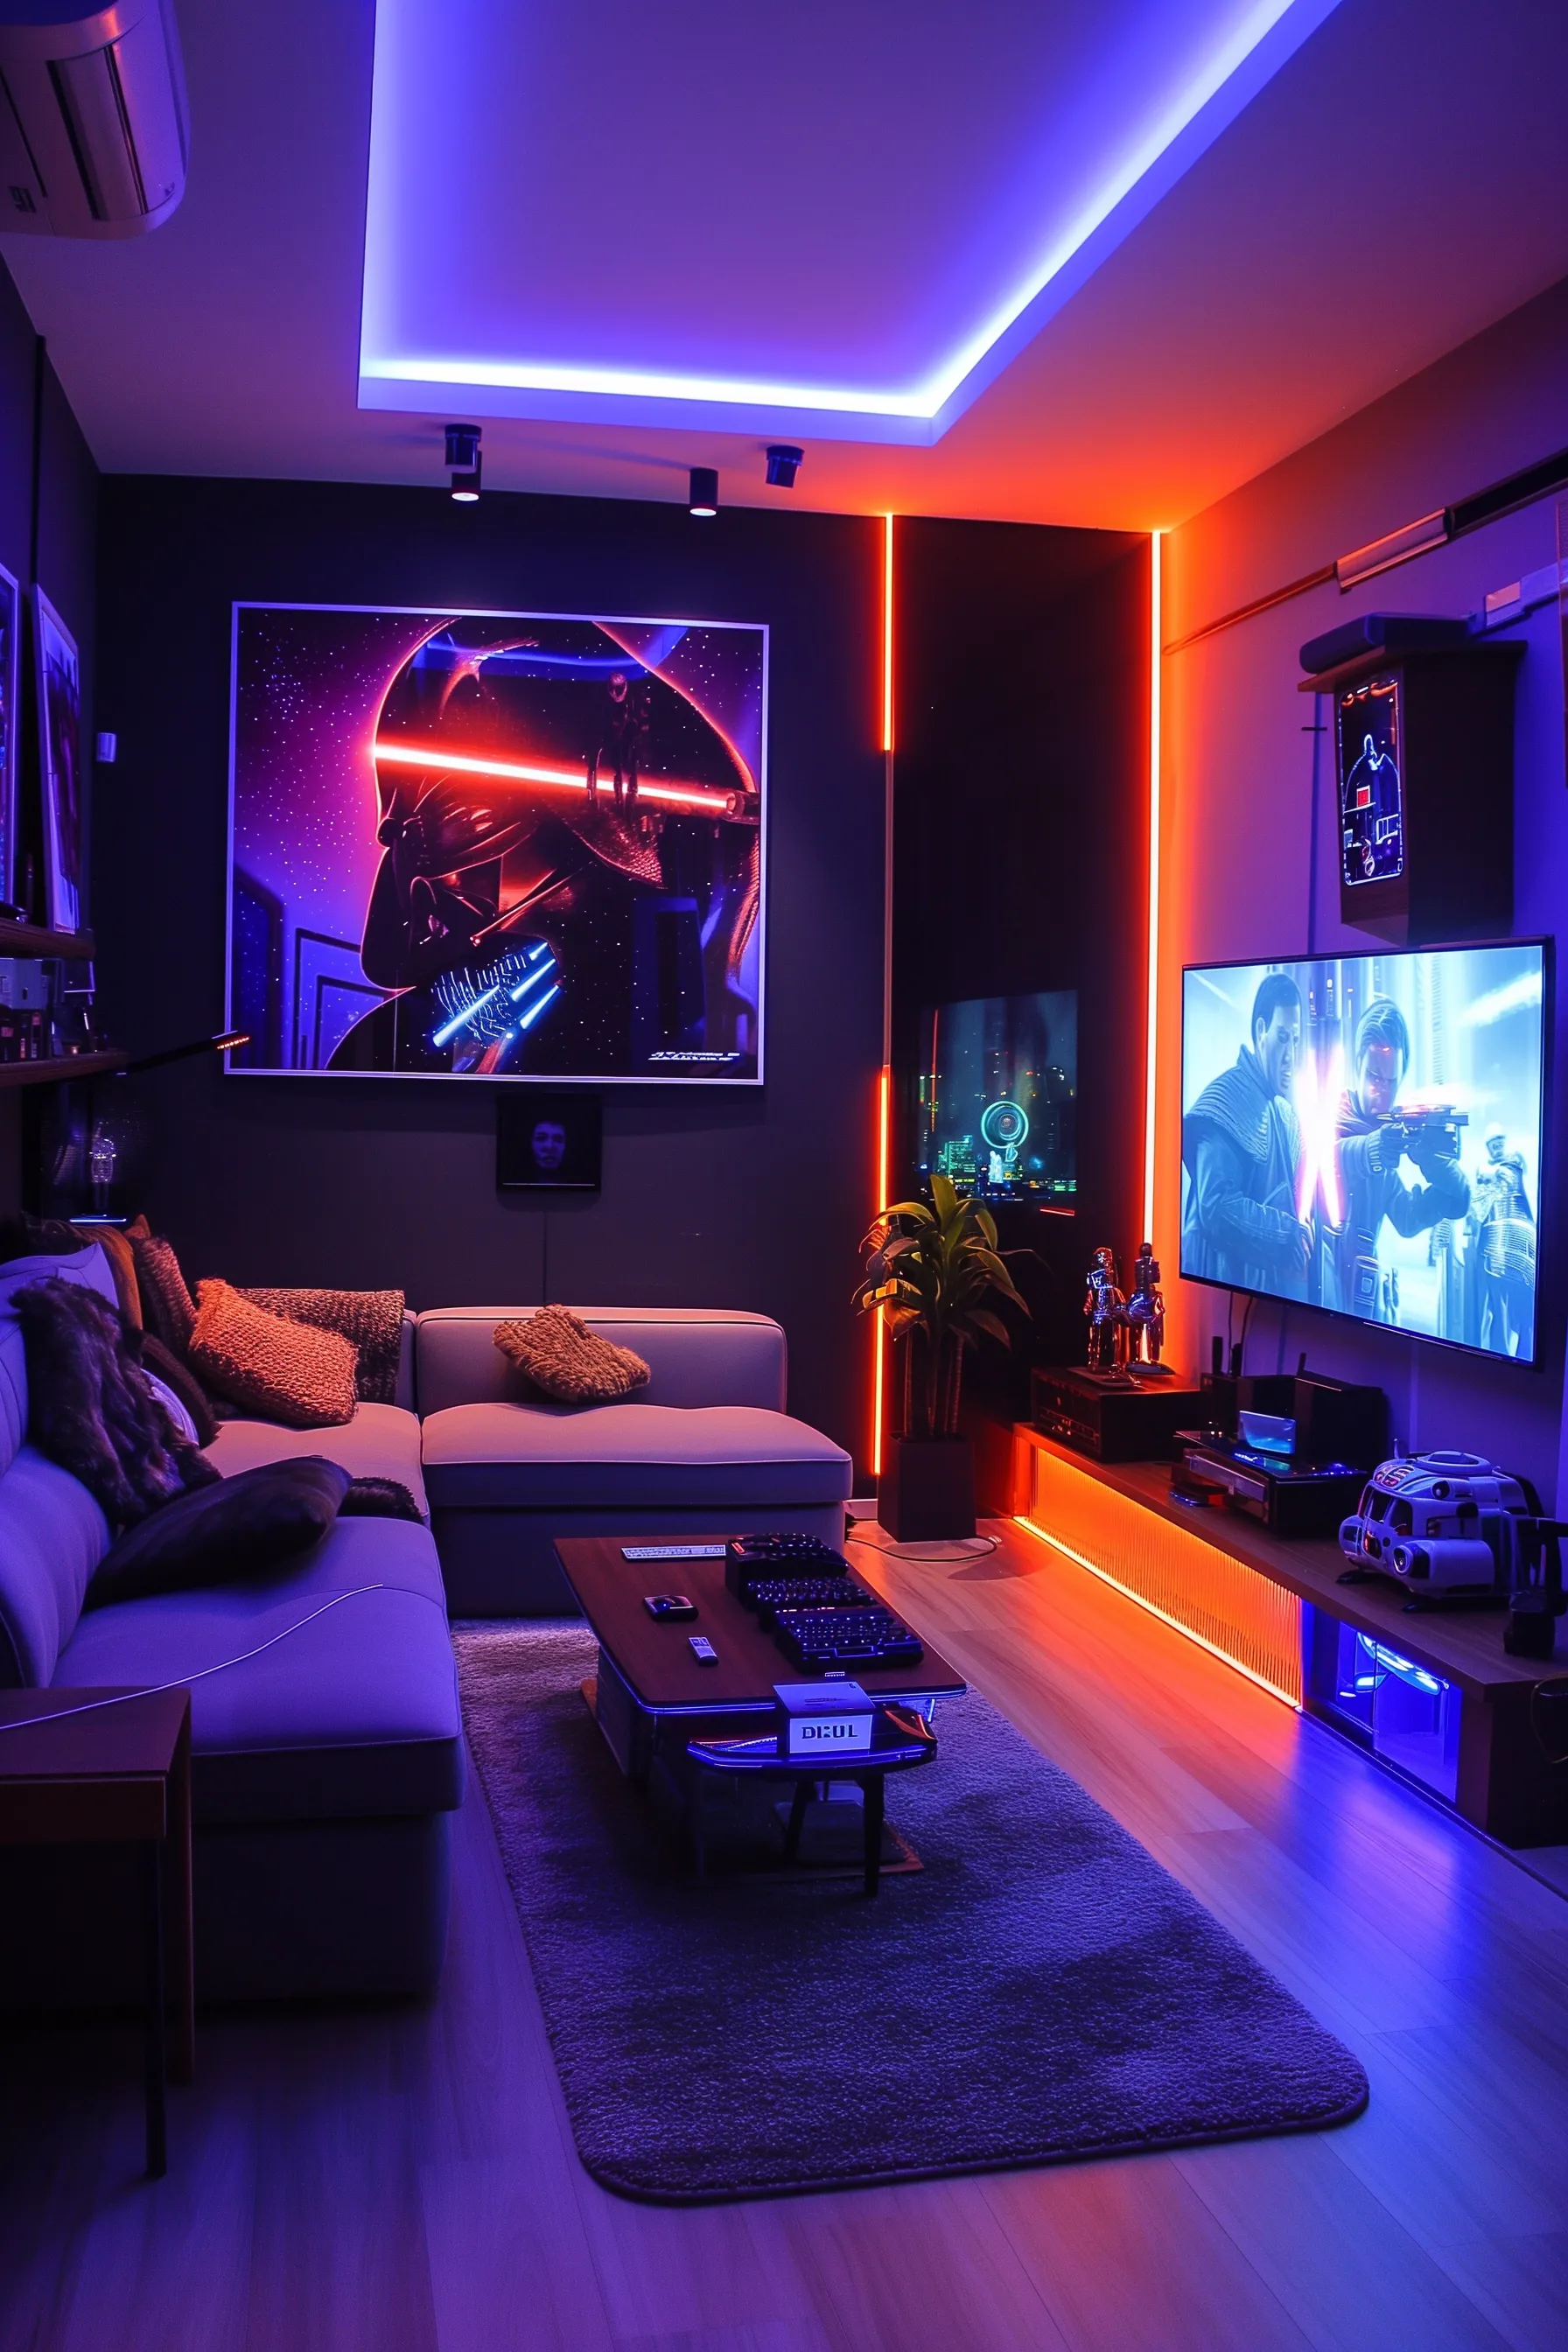 A star wars game room with LED lights